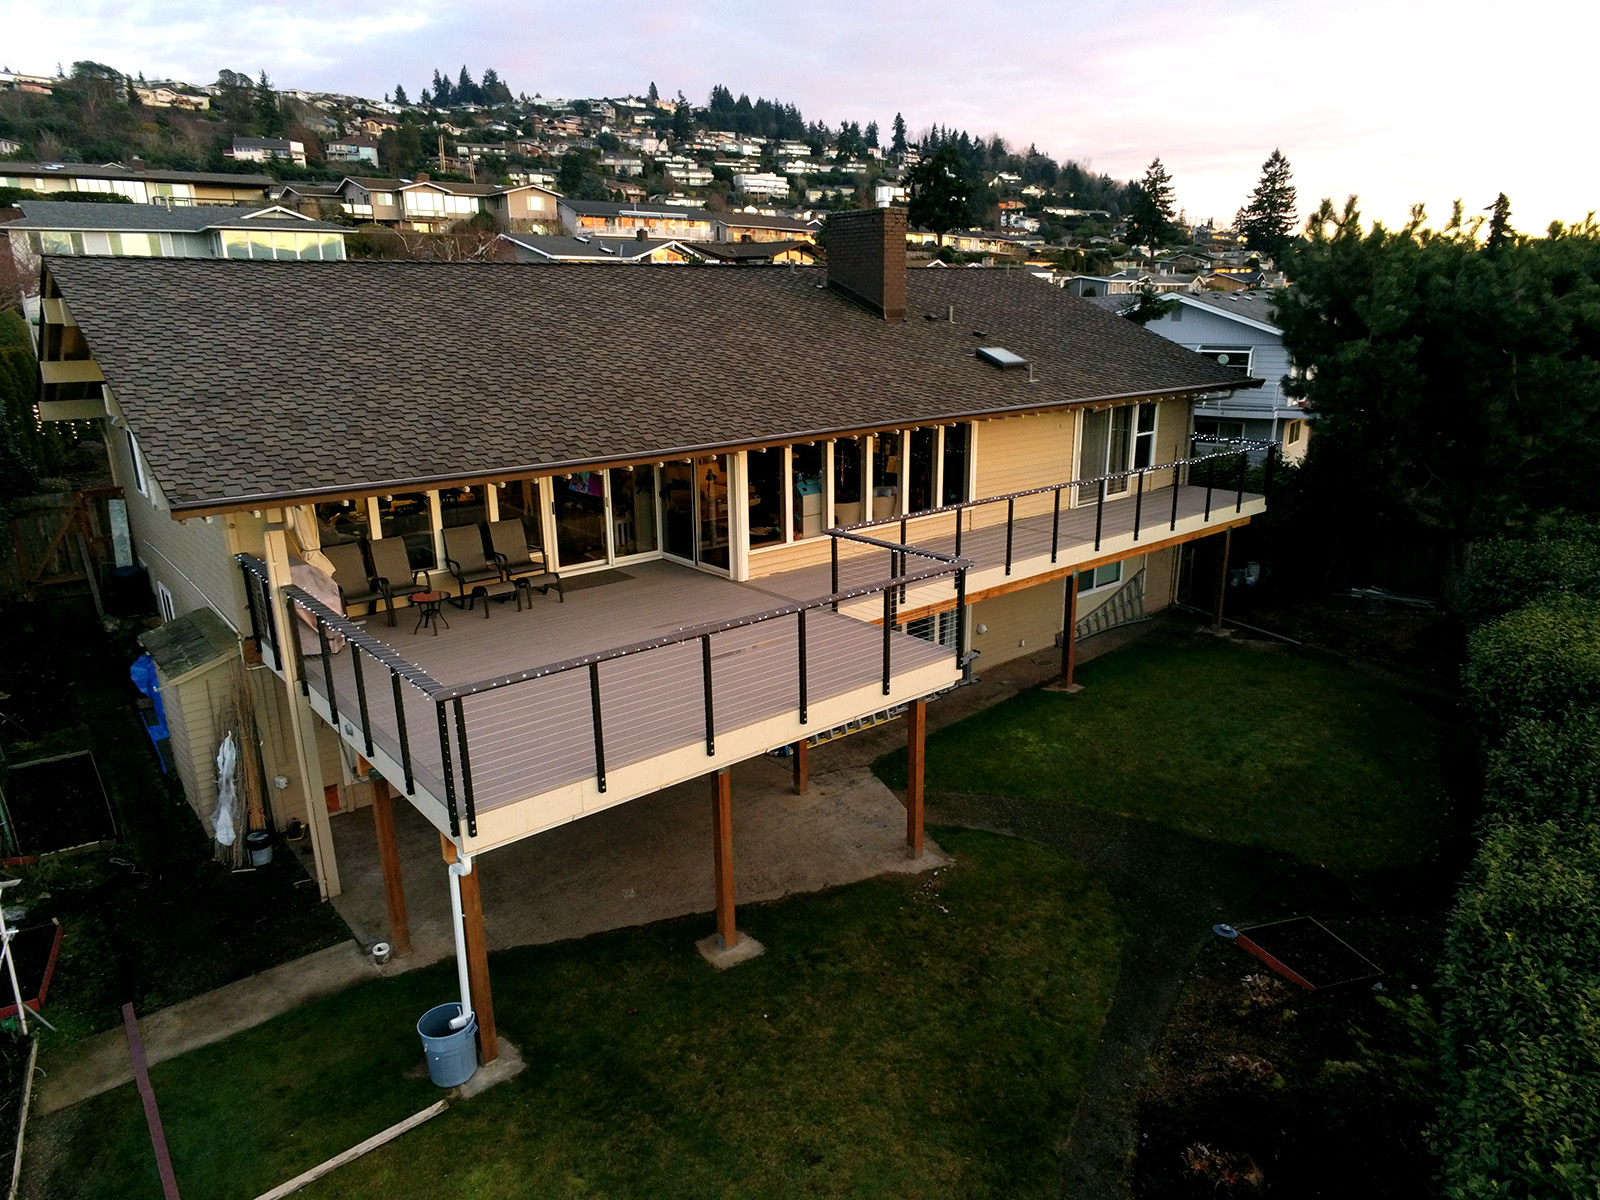 This raised deck balcony mounted in the backyard of the house elevates the homeowner&#8217;s outdoor living space with a view of the city, not obstructed by the custom cable railing.